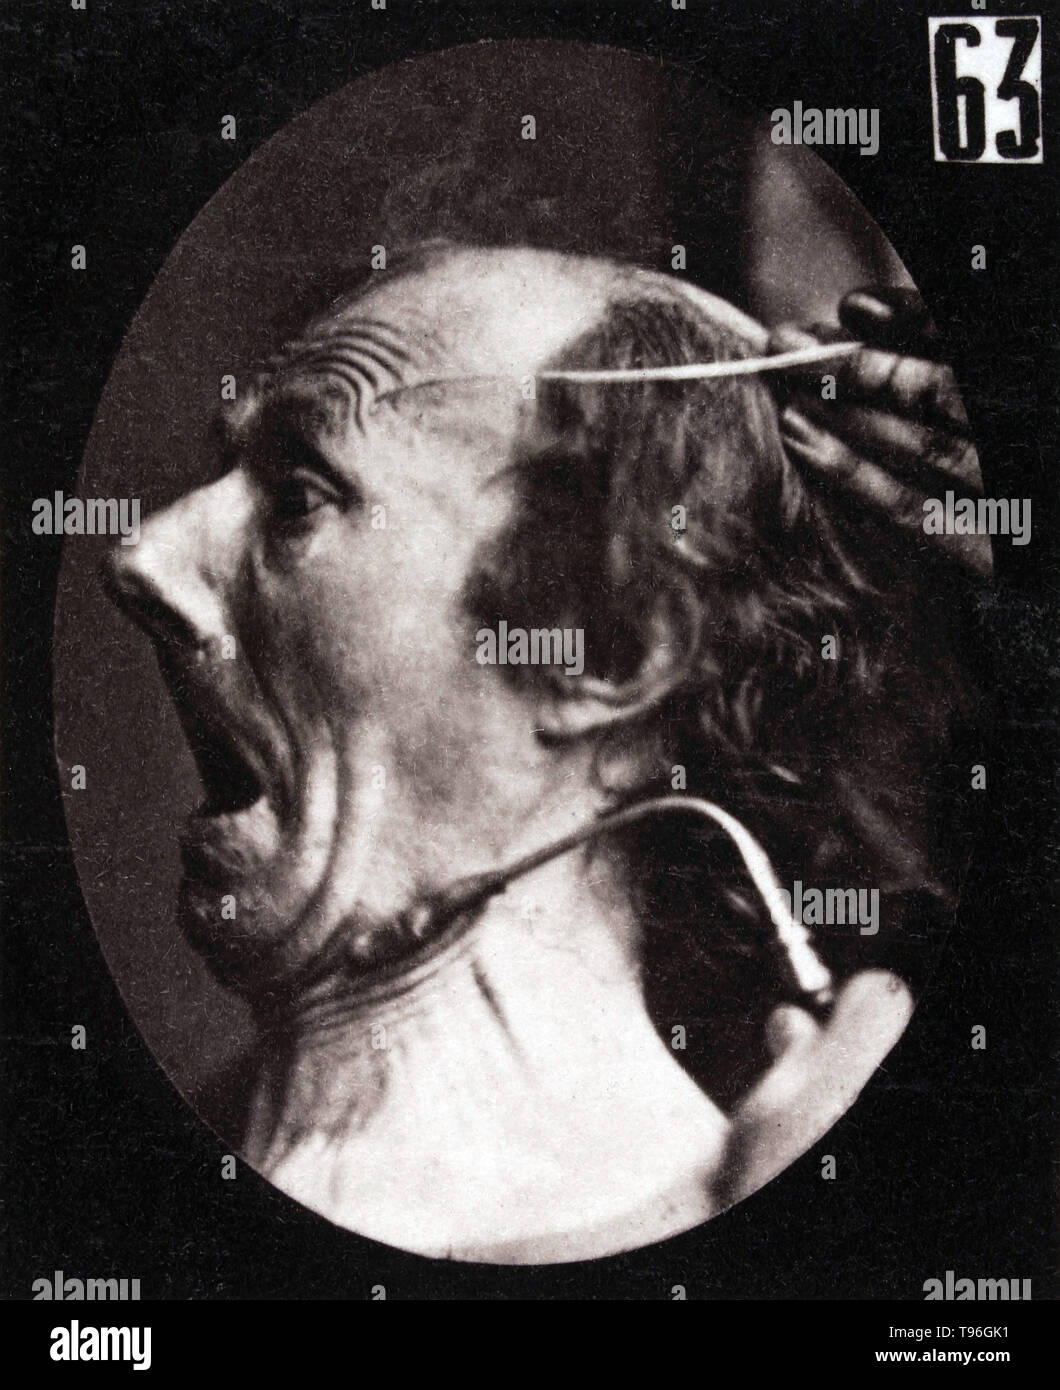 The facial expression of terror on the human face being induced by electrical currents. Guillaume-Benjamin-Amand Duchenne de Boulogne (September 17, 1806 - September 15, 1875) was a French neurologist who advanced the science of electrophysiology. Influenced by the beliefs of physiognomy, Duchenne wanted to determine how the muscles in the human face produce facial expressions which he believed to be directly linked to the soul of man. Stock Photo